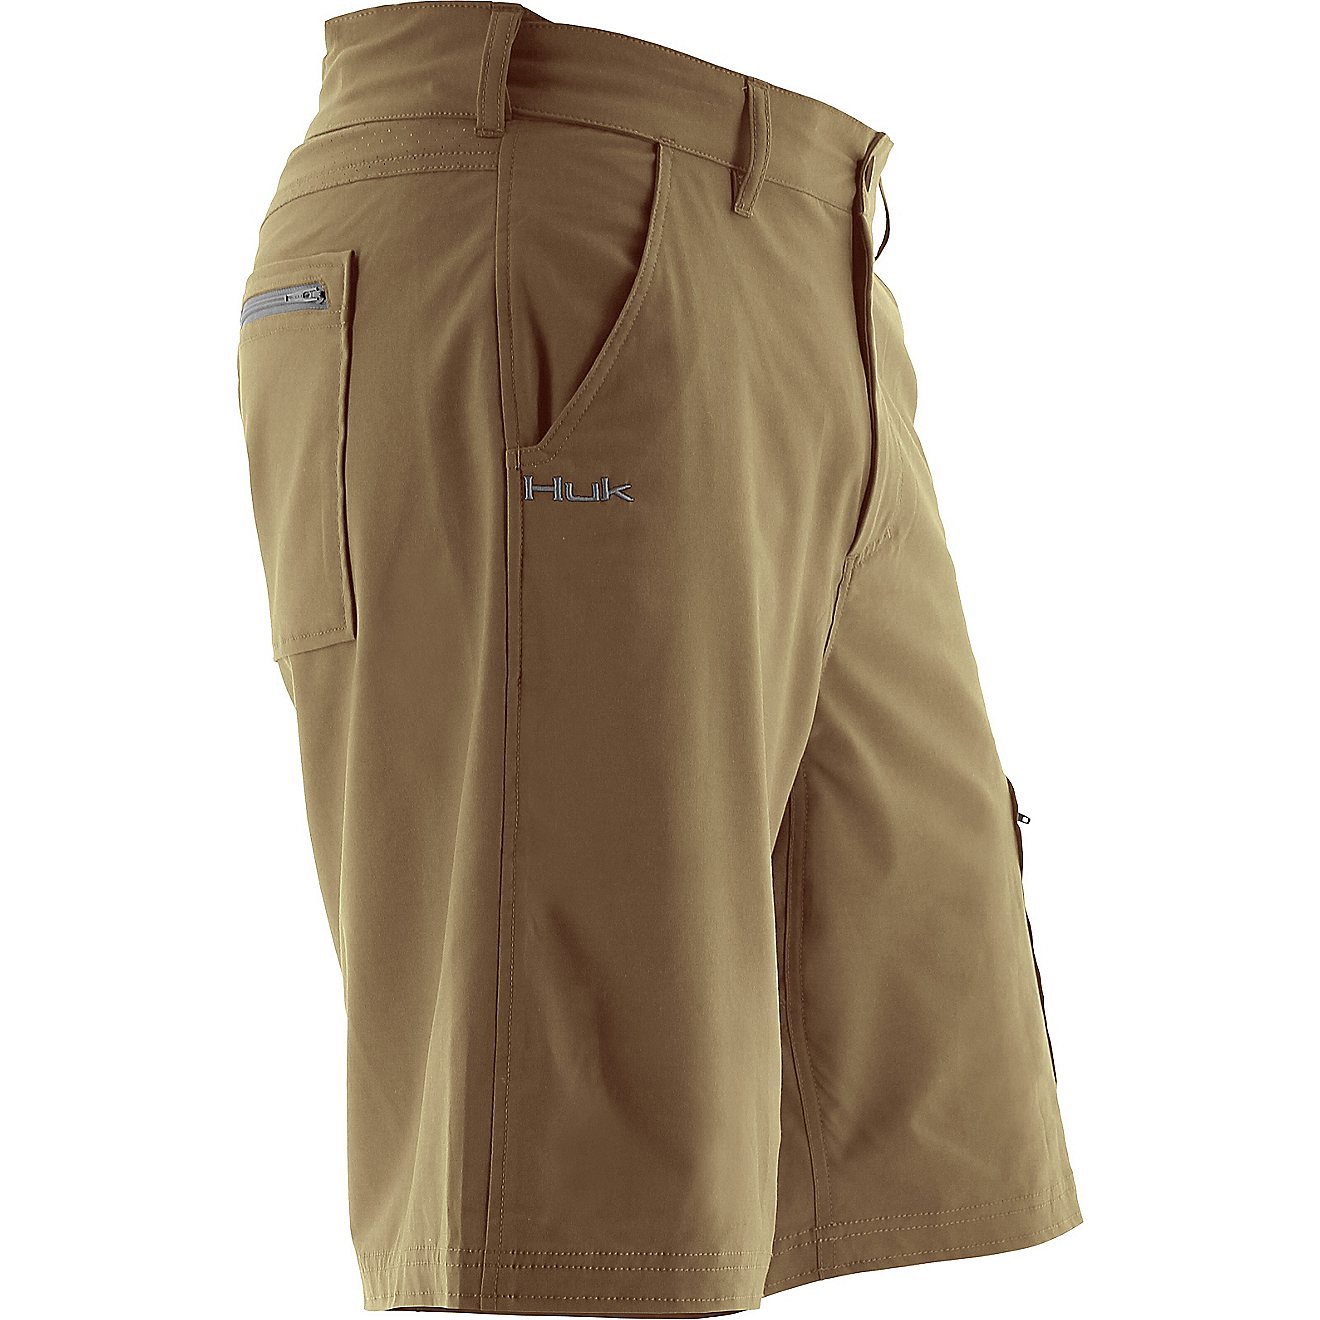 Huk Men's Next Level Shorts                                                                                                      - view number 1